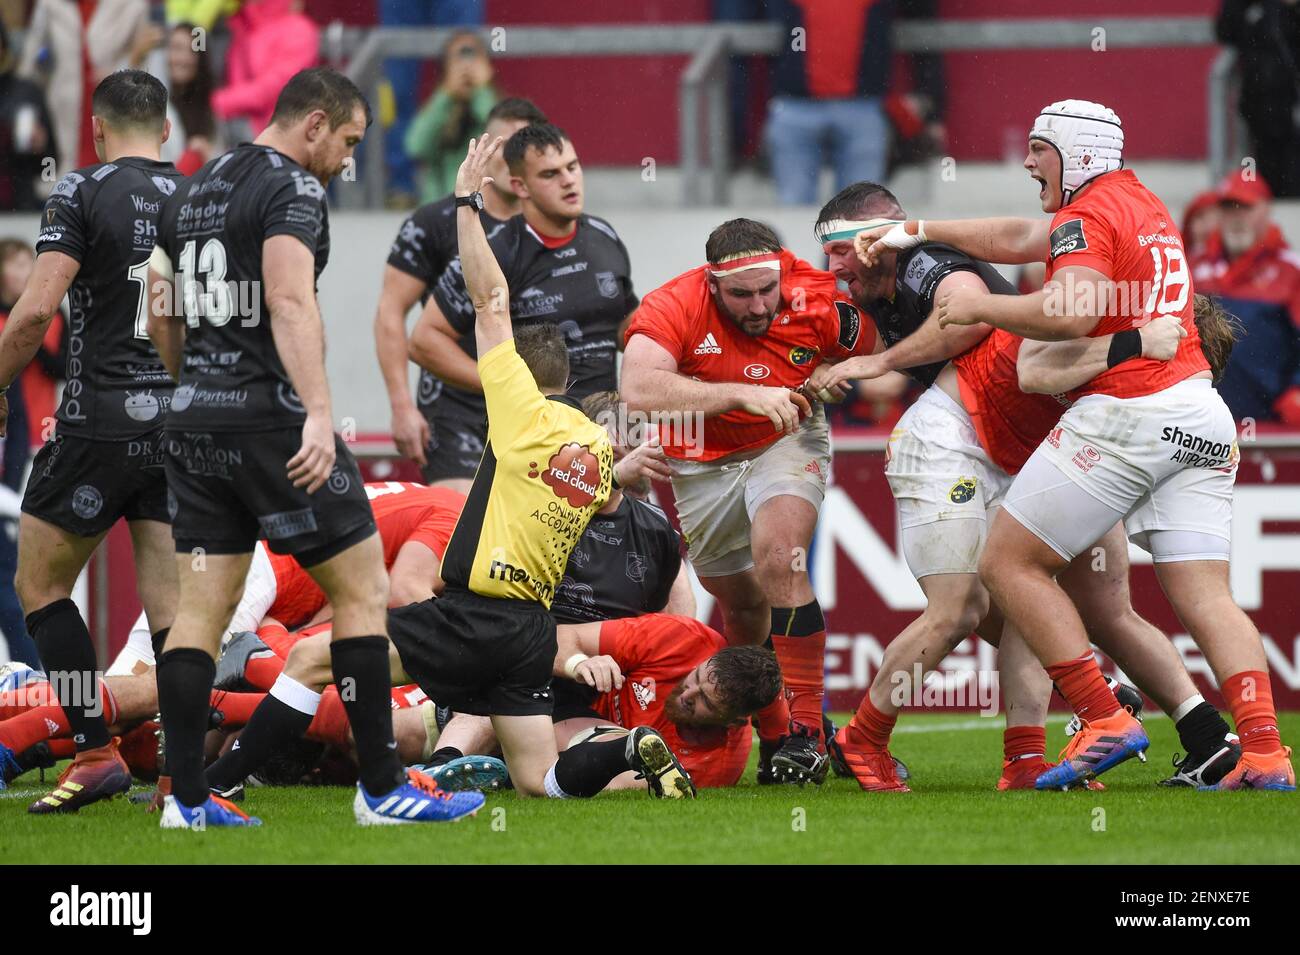 Diarmuid Barron of Munster scores a try during the Guinness PRO14 match between Munster Rugby and